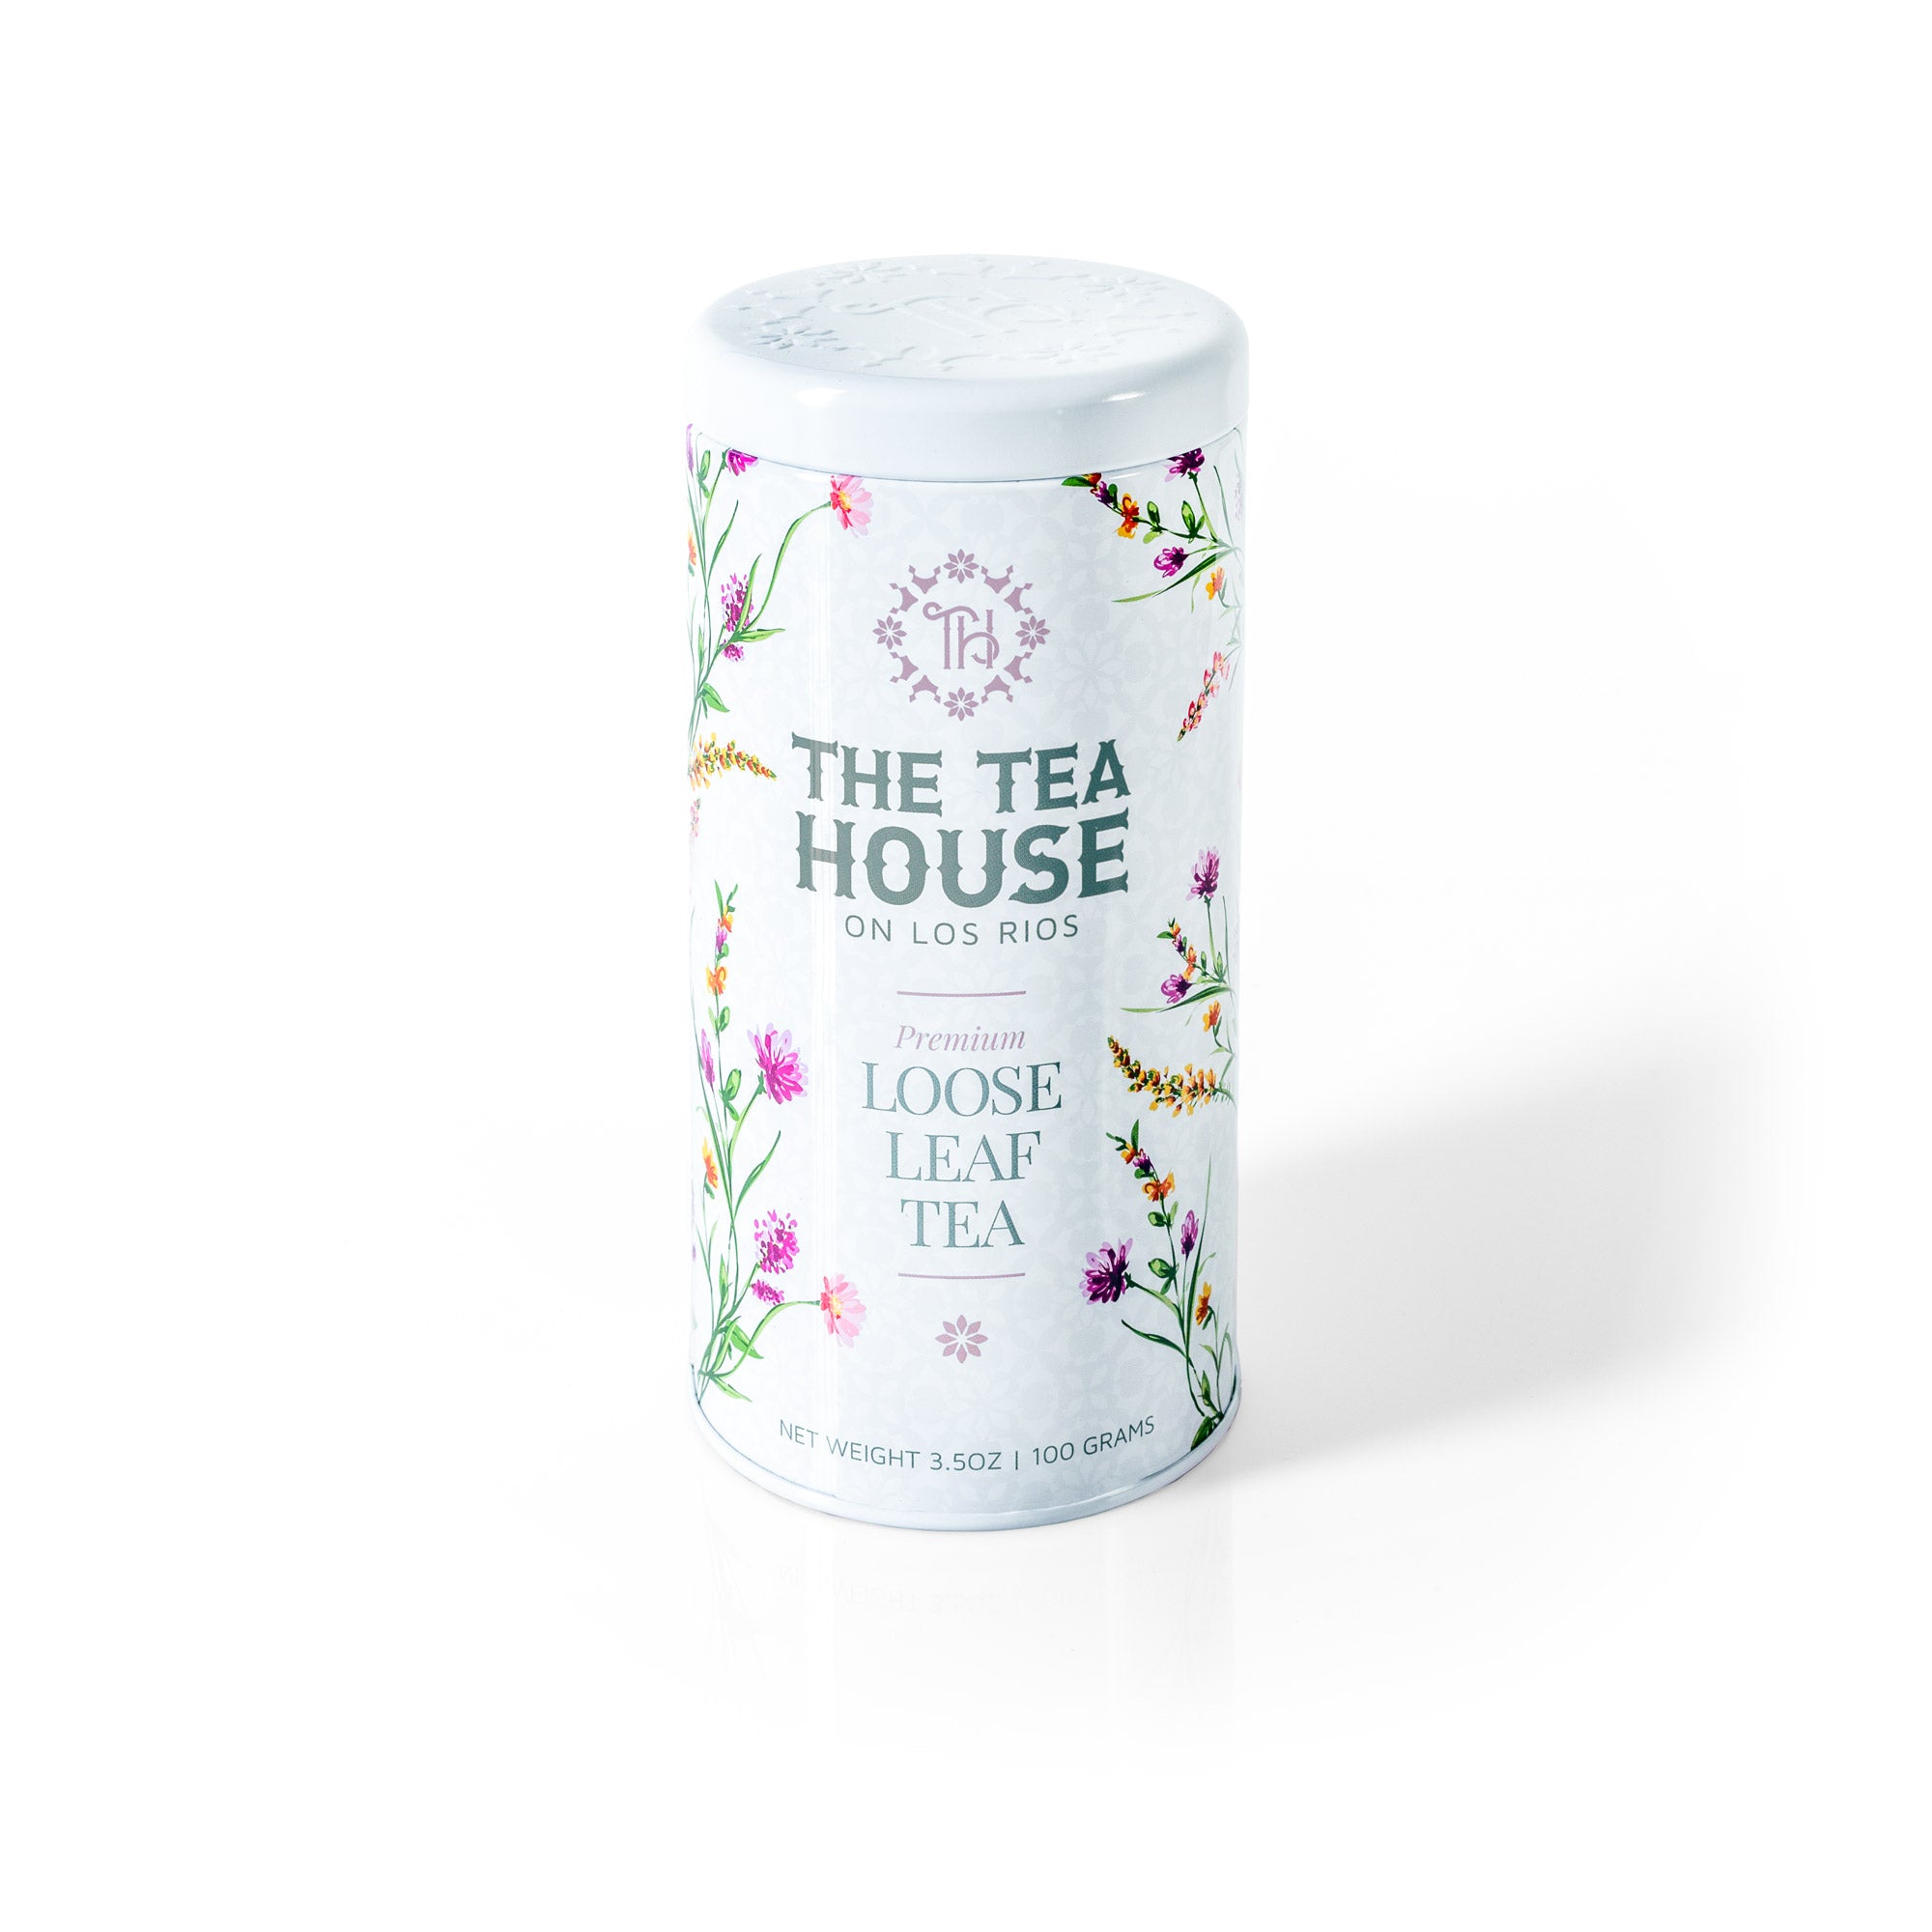 The Tea House Private Reserve. 